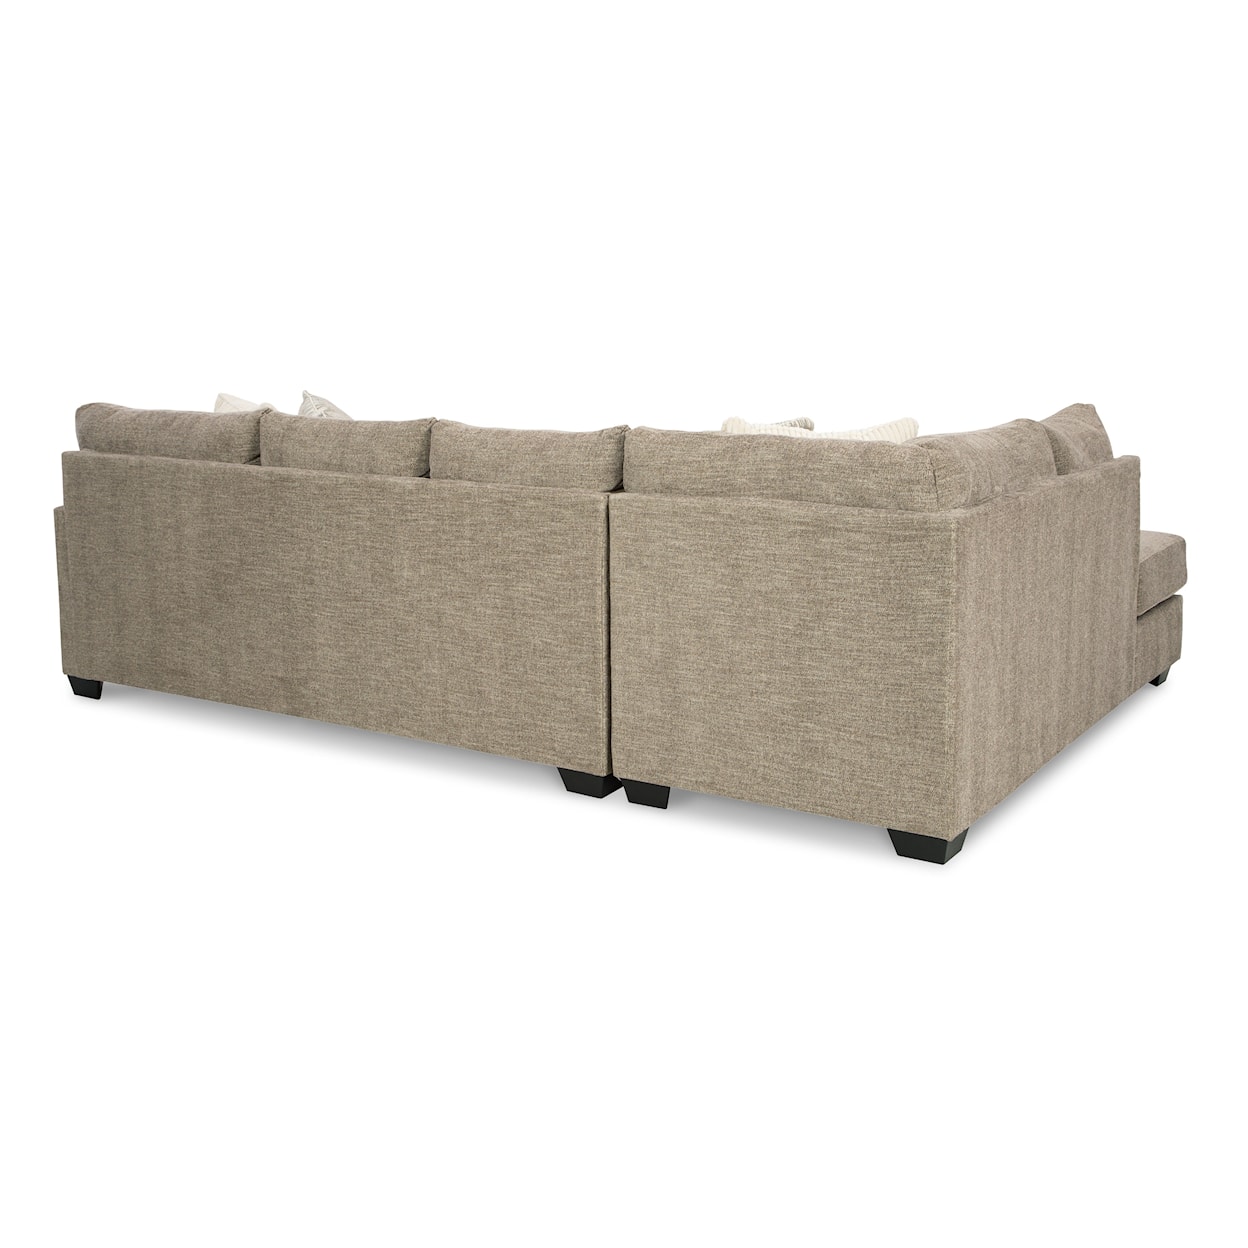 Signature Design Creswell 2-Piece Sectional with 2 Chaises